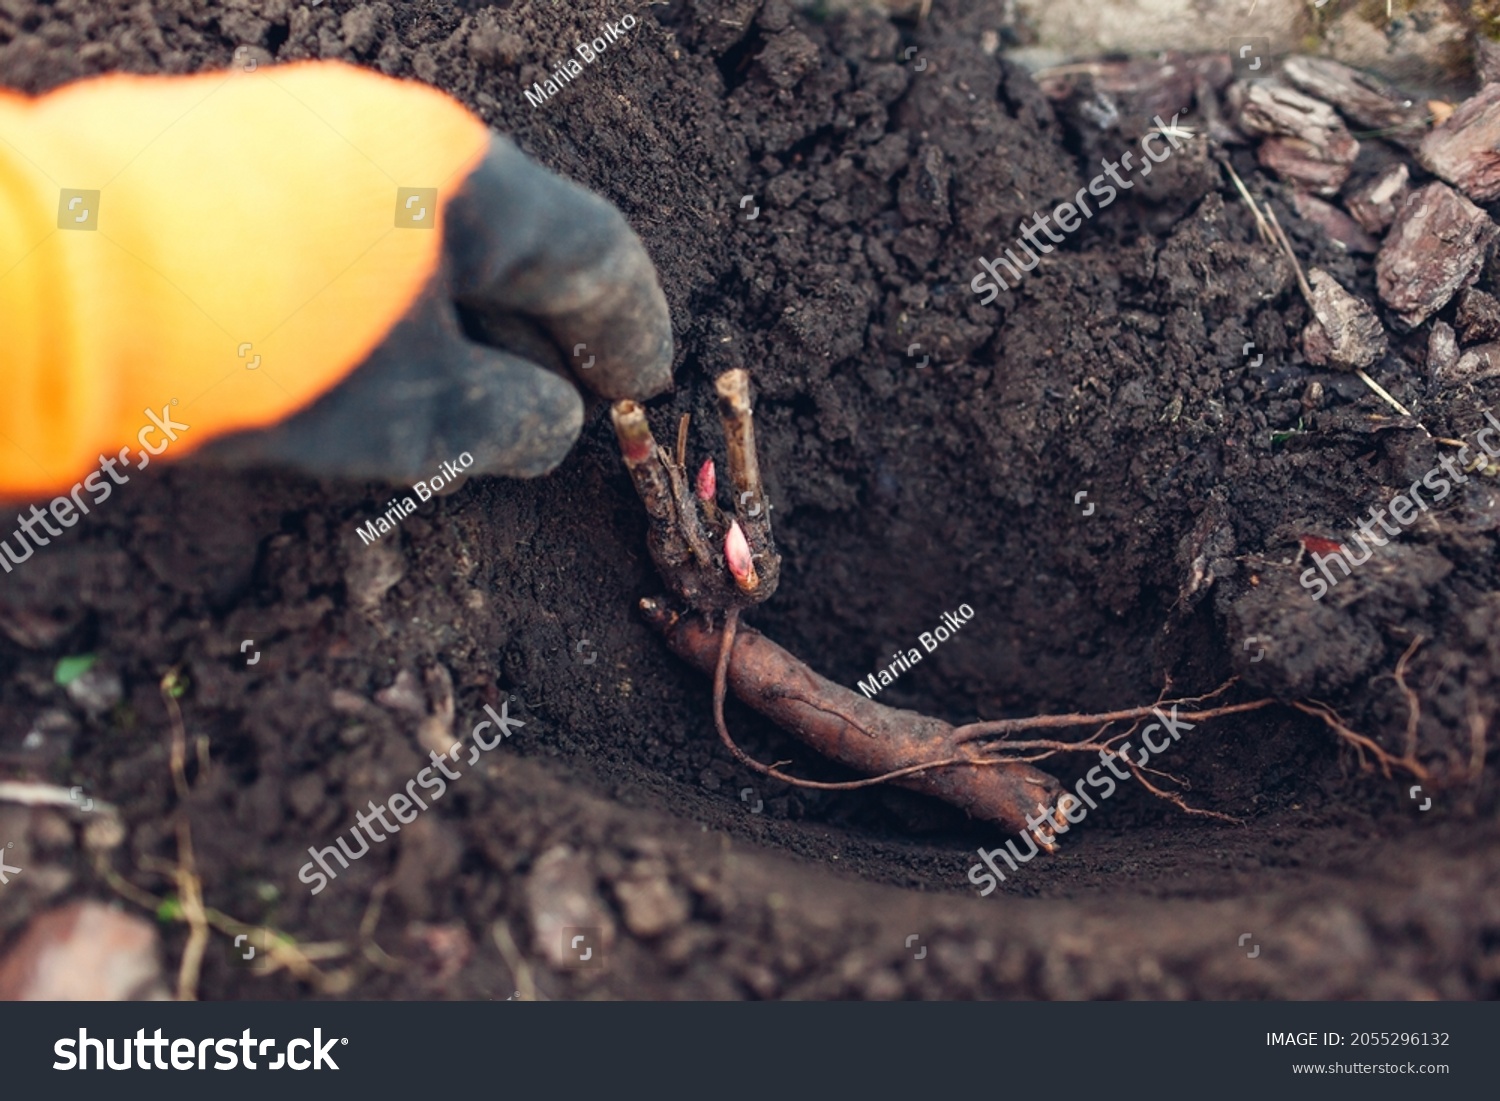 Gardener planting bare rooted peony tubers in soil in autumn garden. Fall propagation work #2055296132